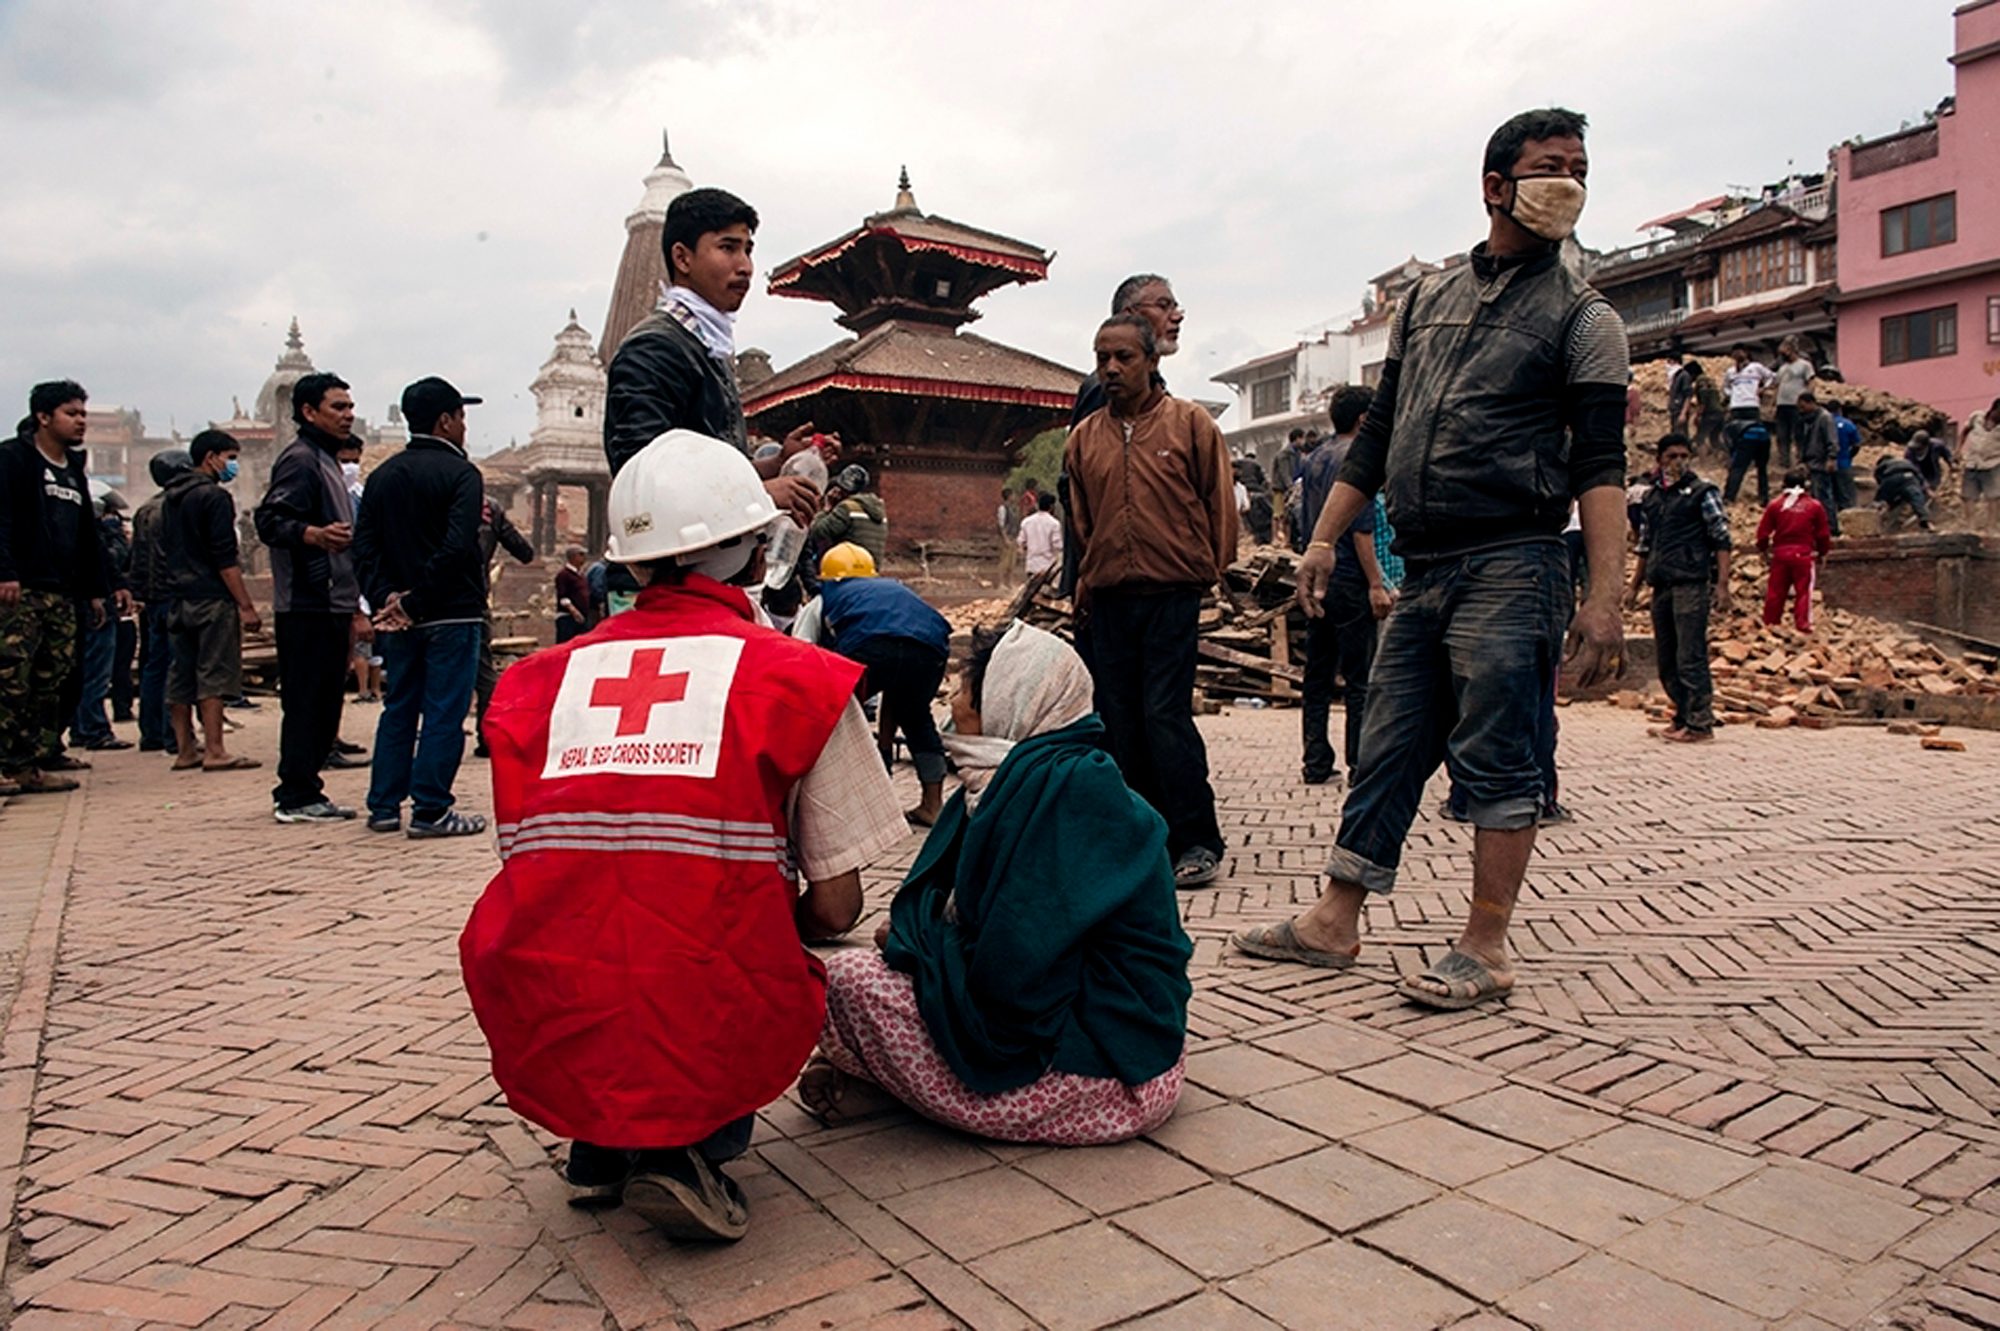 HELPING HAND. A handout photo provided by the International Federation of the Red Cross (IFRC) on 26 April 2015 of rescue workers from the Nepal Red Cross Society helping injured people in Kathmandu, Nepal, April 26, 2015. Carl Whetham/IFRC/Handout/EPA 